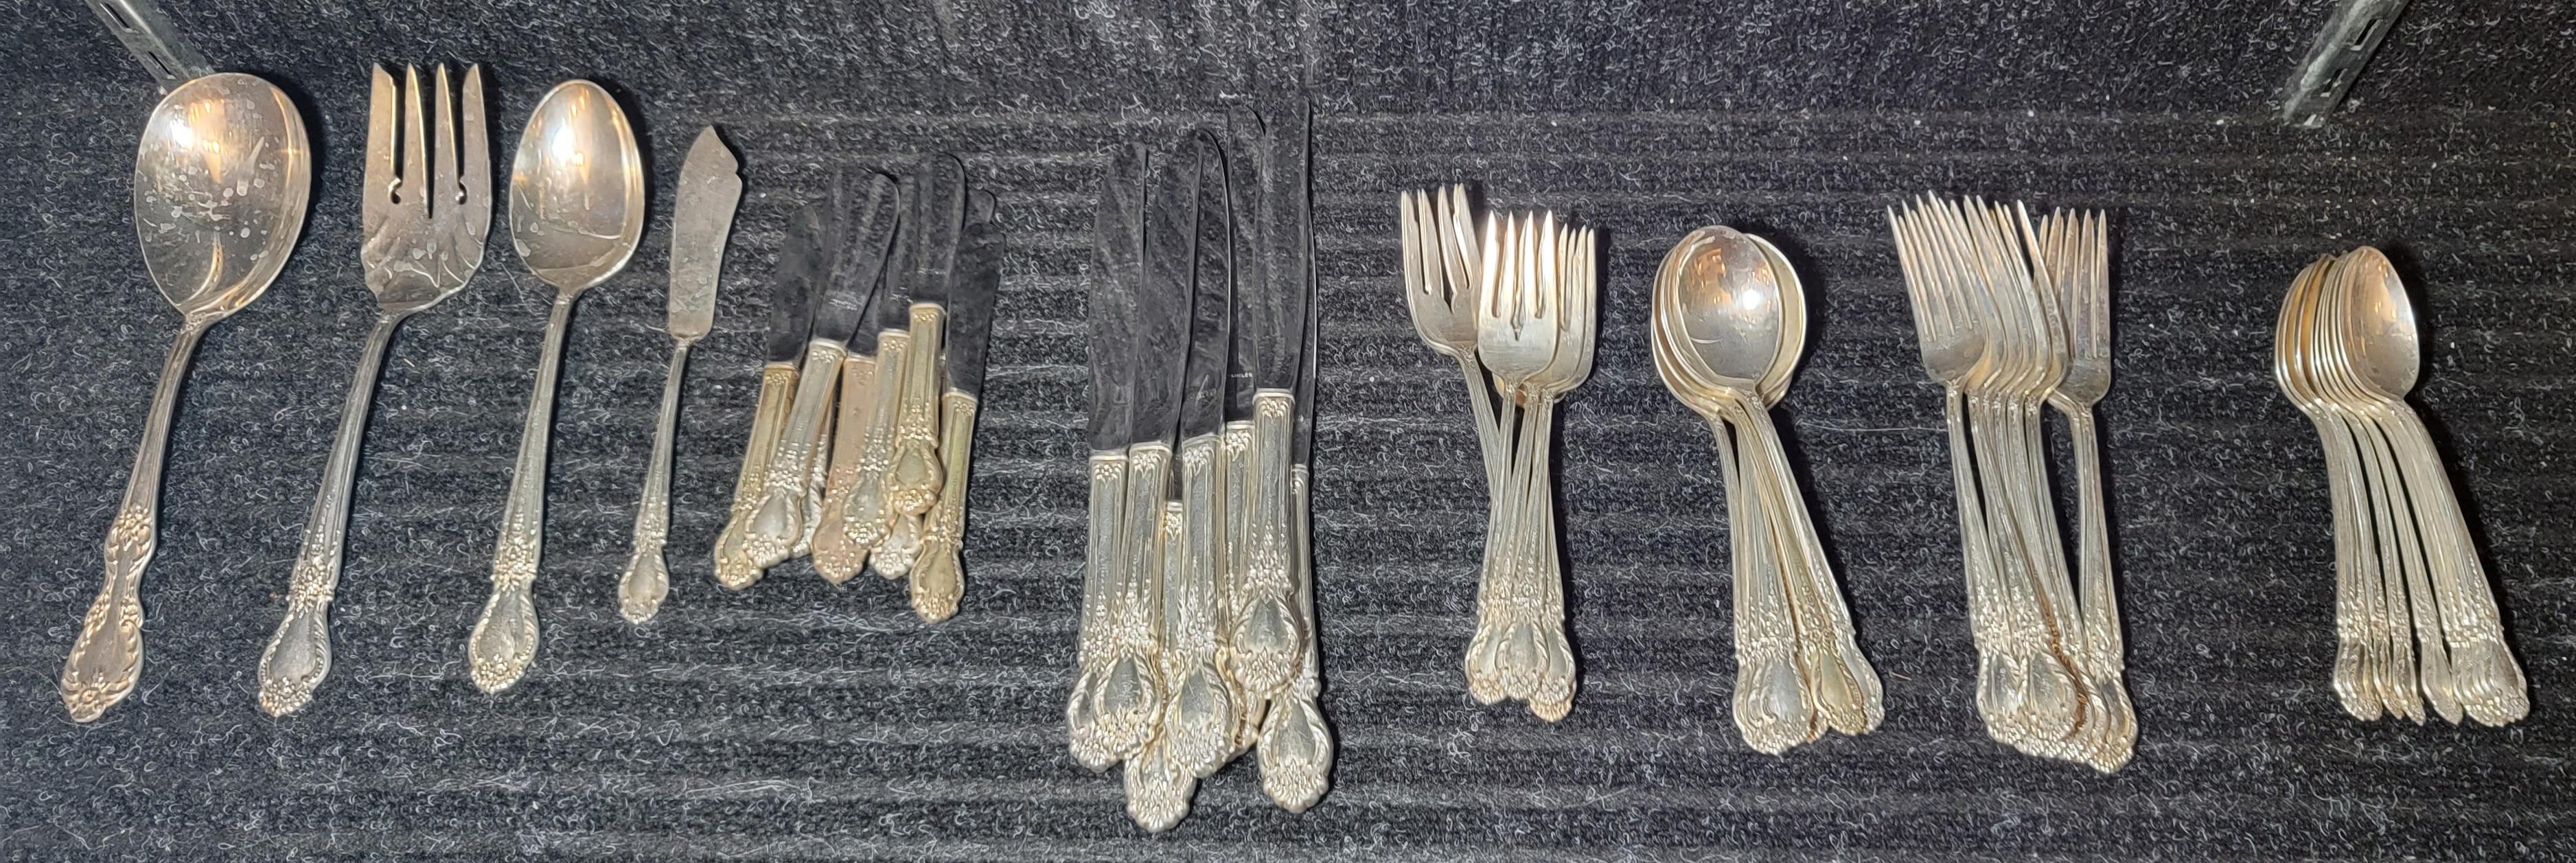 52 Piece International Sterling Silver Set Serving for 8 In Good Condition For Sale In Pasadena, CA